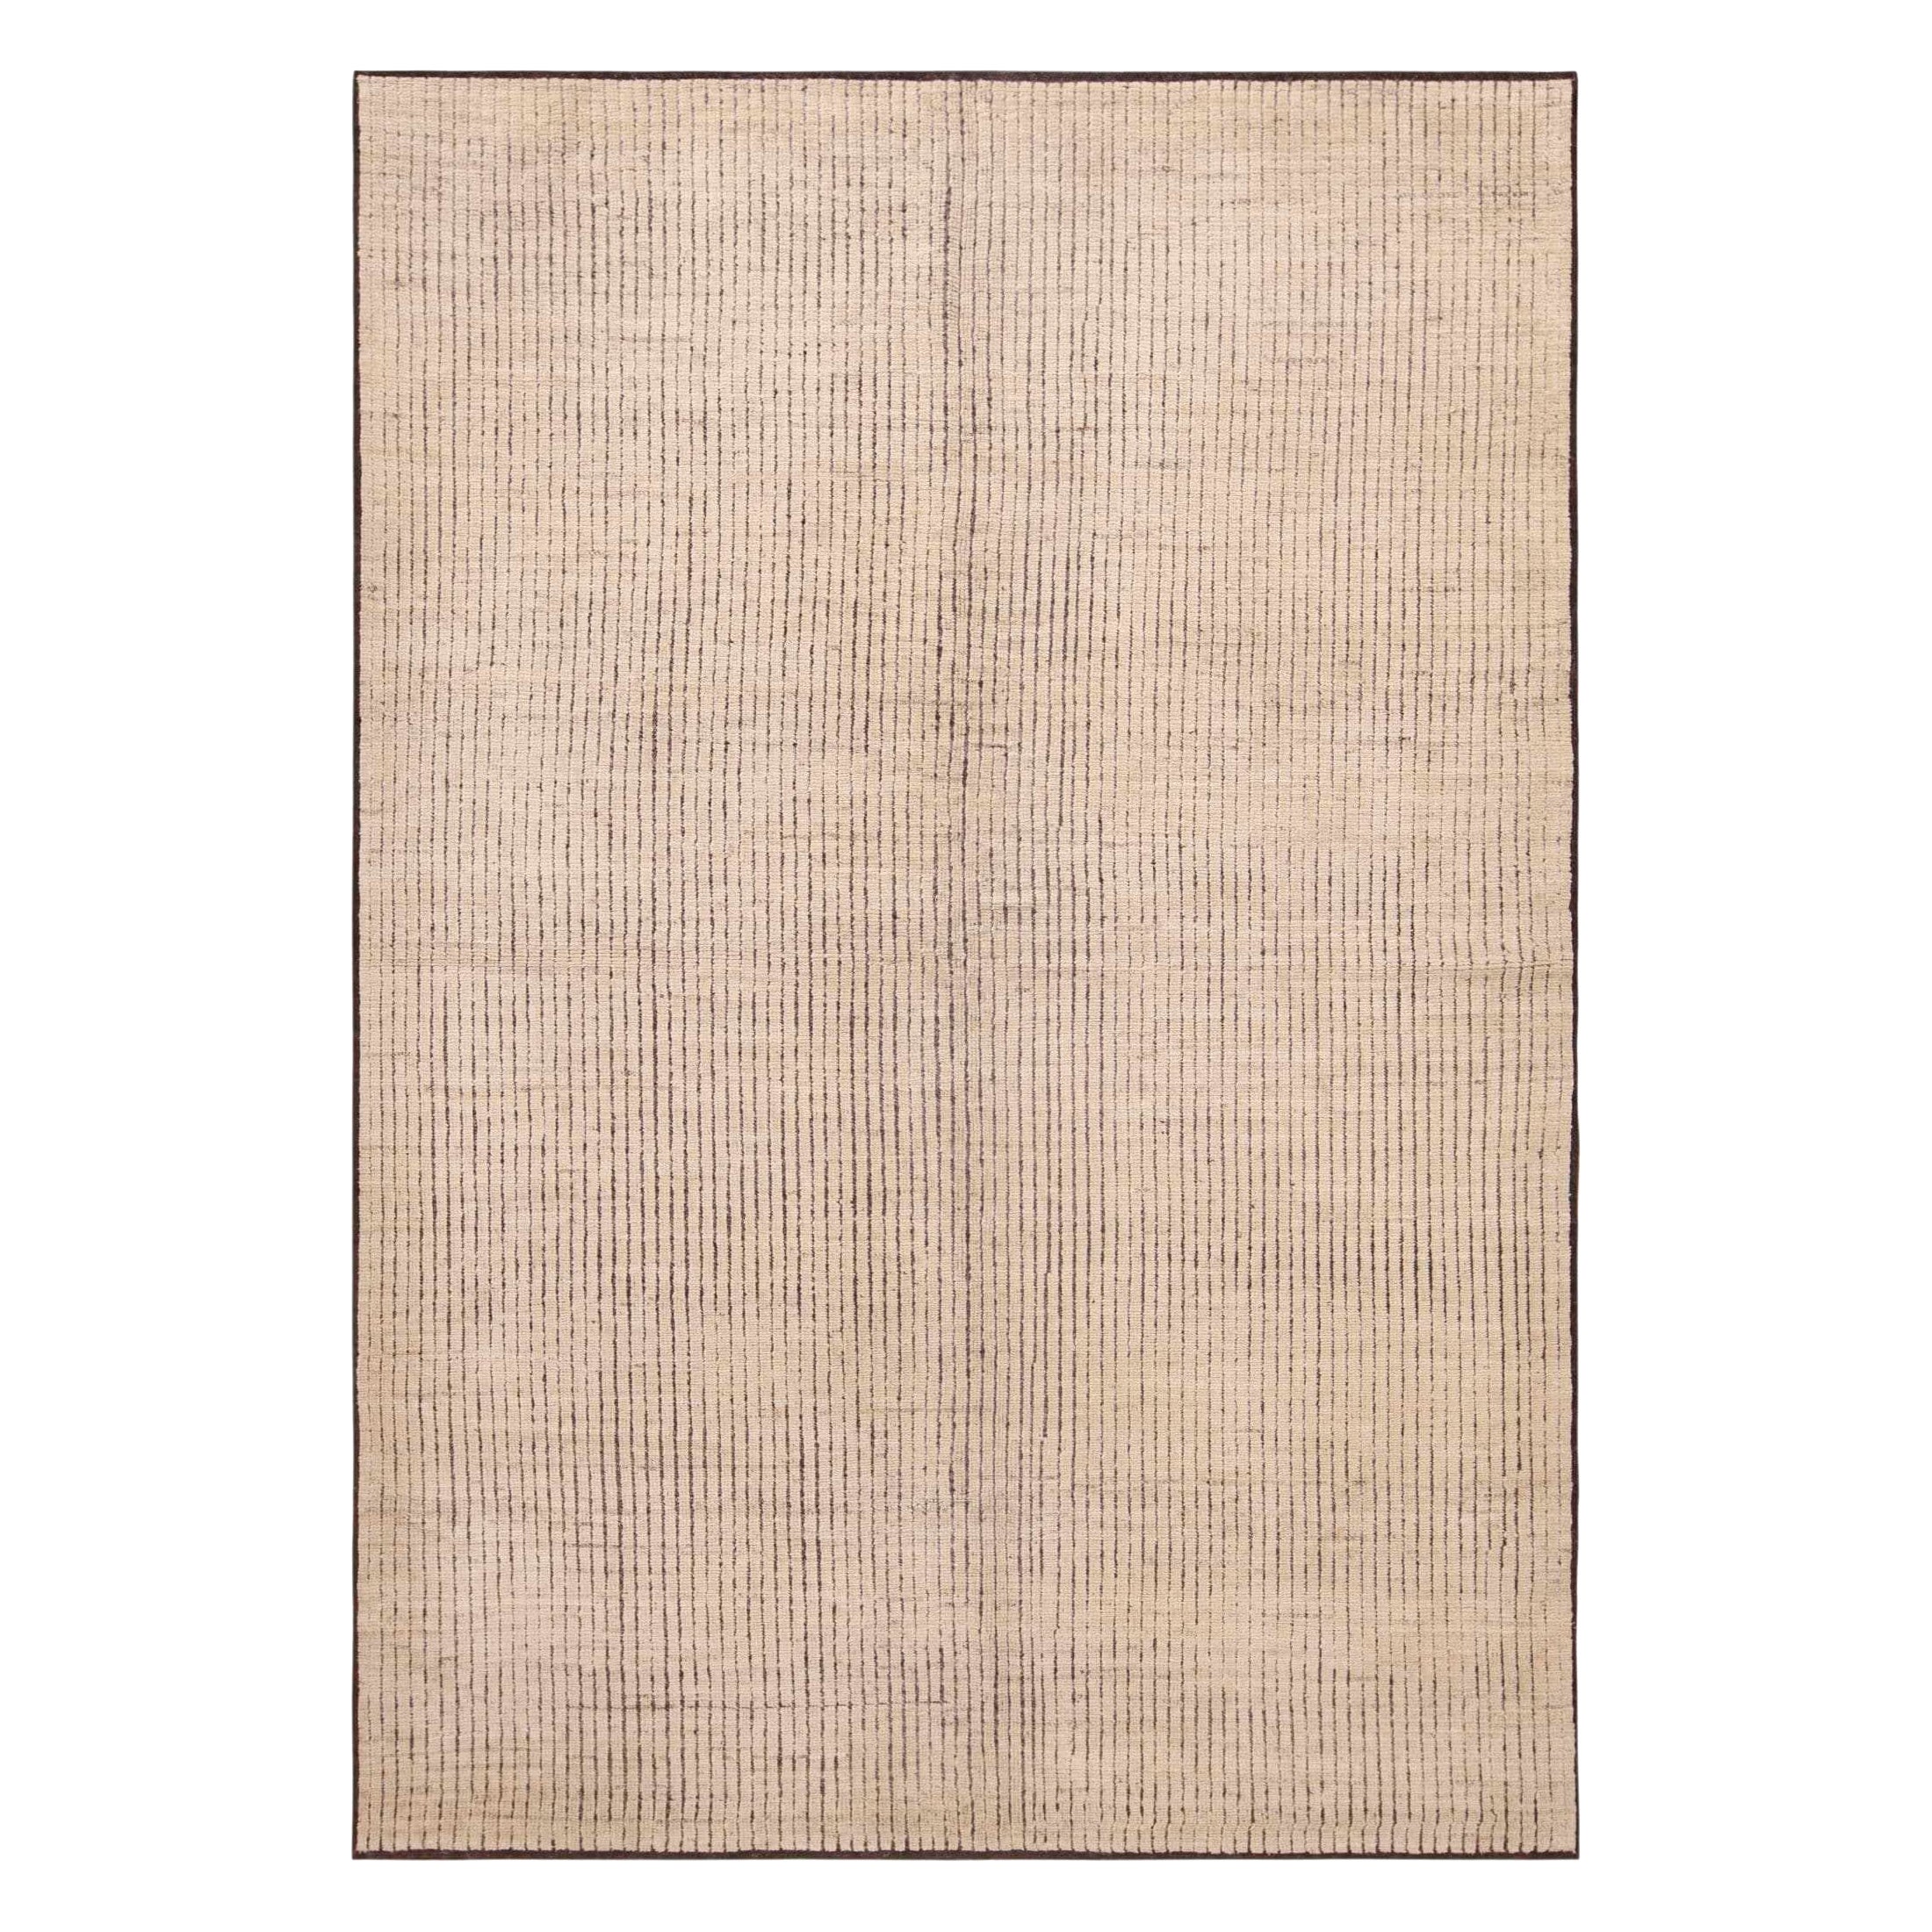 Nazmiyal Collection Neutrale Töne Chic Contemporary Modern Area Rug 6'3" x 9'3"